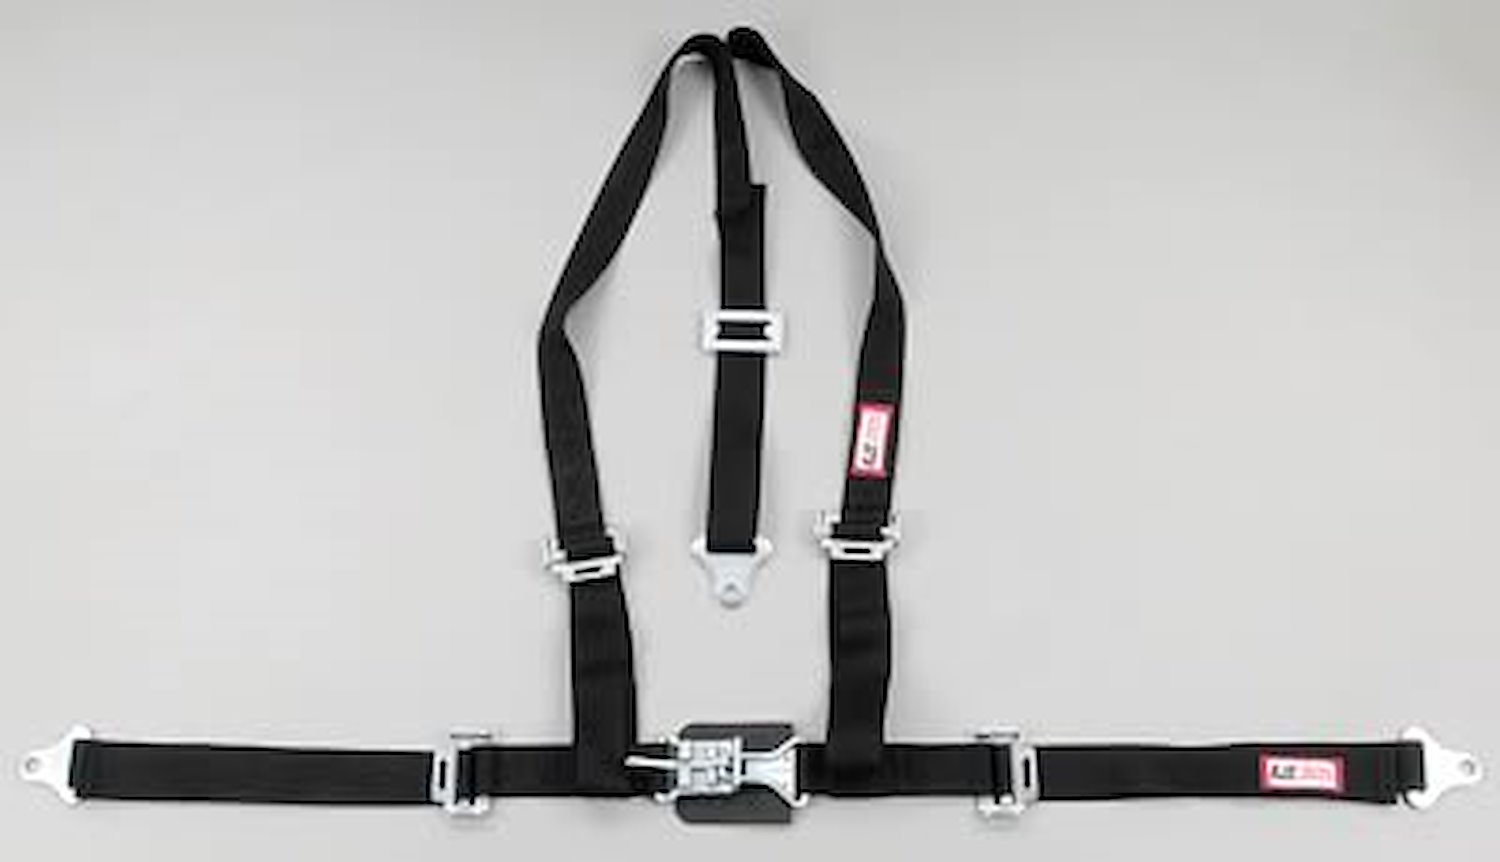 NON-SFI L&L HARNESS 3 PULL DOWN Lap Belt SNAP SEWN IN 2 S.H. Individual FLOOR Mount w/STERNUM STRAP WRAP/BOLT HOT PINK